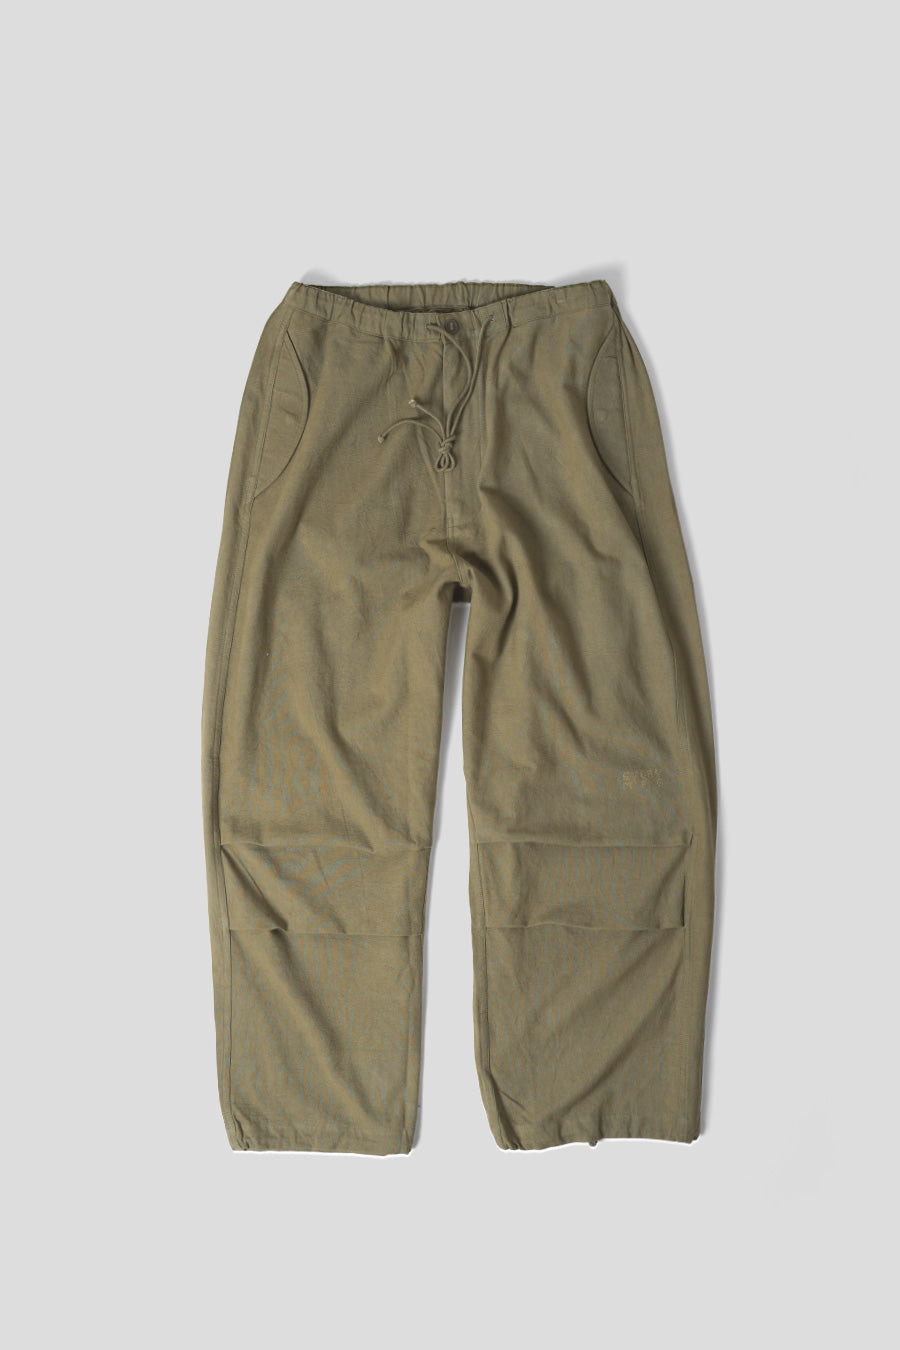 Story mfg. - OLIVE PACO PANTS - LE LABO STORE